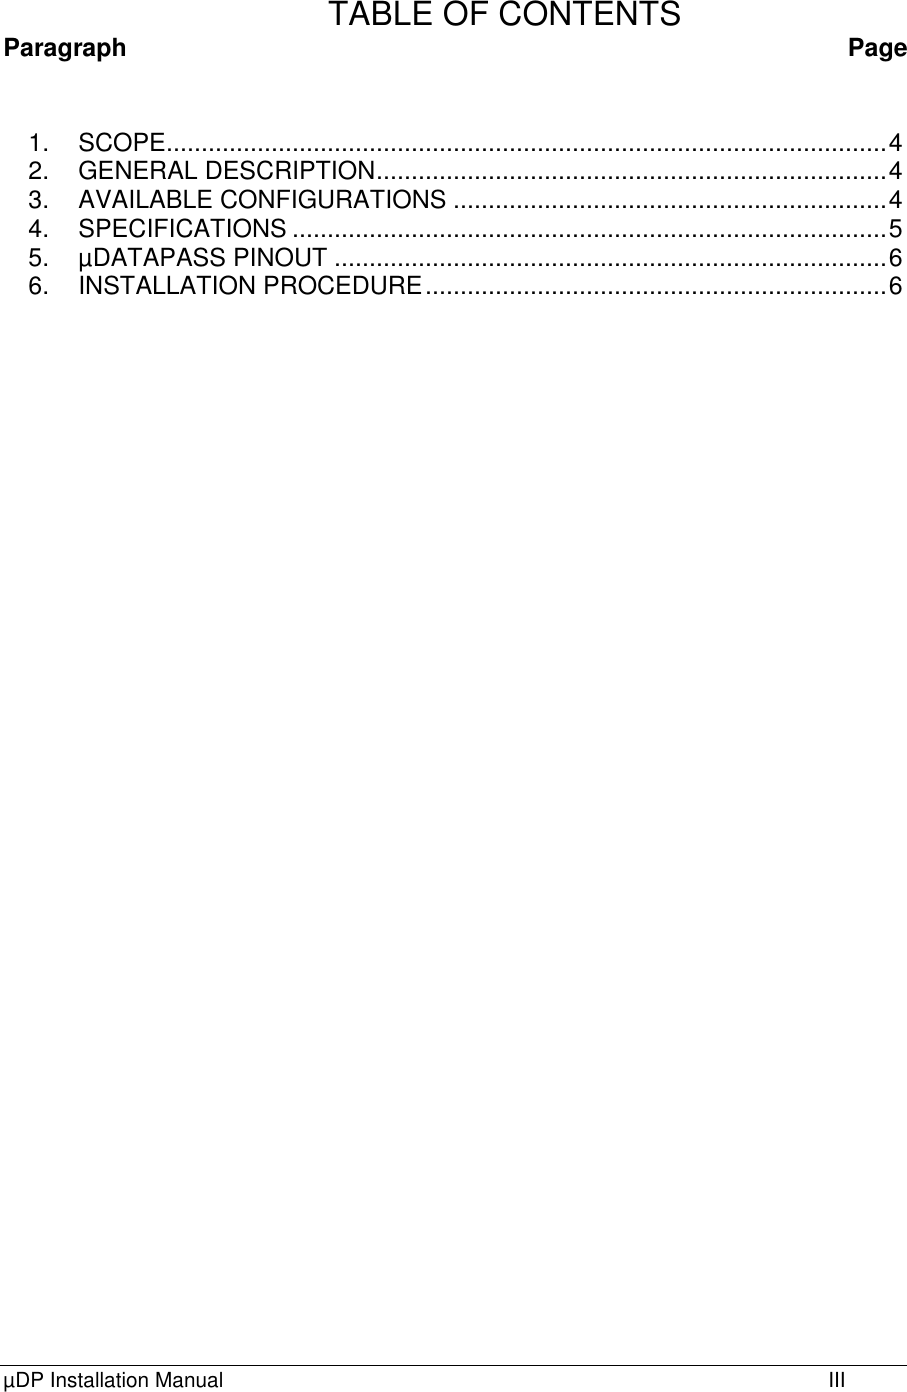 µDP Installation Manual                 III  TABLE OF CONTENTS Paragraph Page   1. SCOPE ....................................................................................................... 4 2. GENERAL DESCRIPTION ......................................................................... 4 3. AVAILABLE CONFIGURATIONS .............................................................. 4 4. SPECIFICATIONS ..................................................................................... 5 5. µDATAPASS PINOUT ............................................................................... 6 6. INSTALLATION PROCEDURE .................................................................. 6  